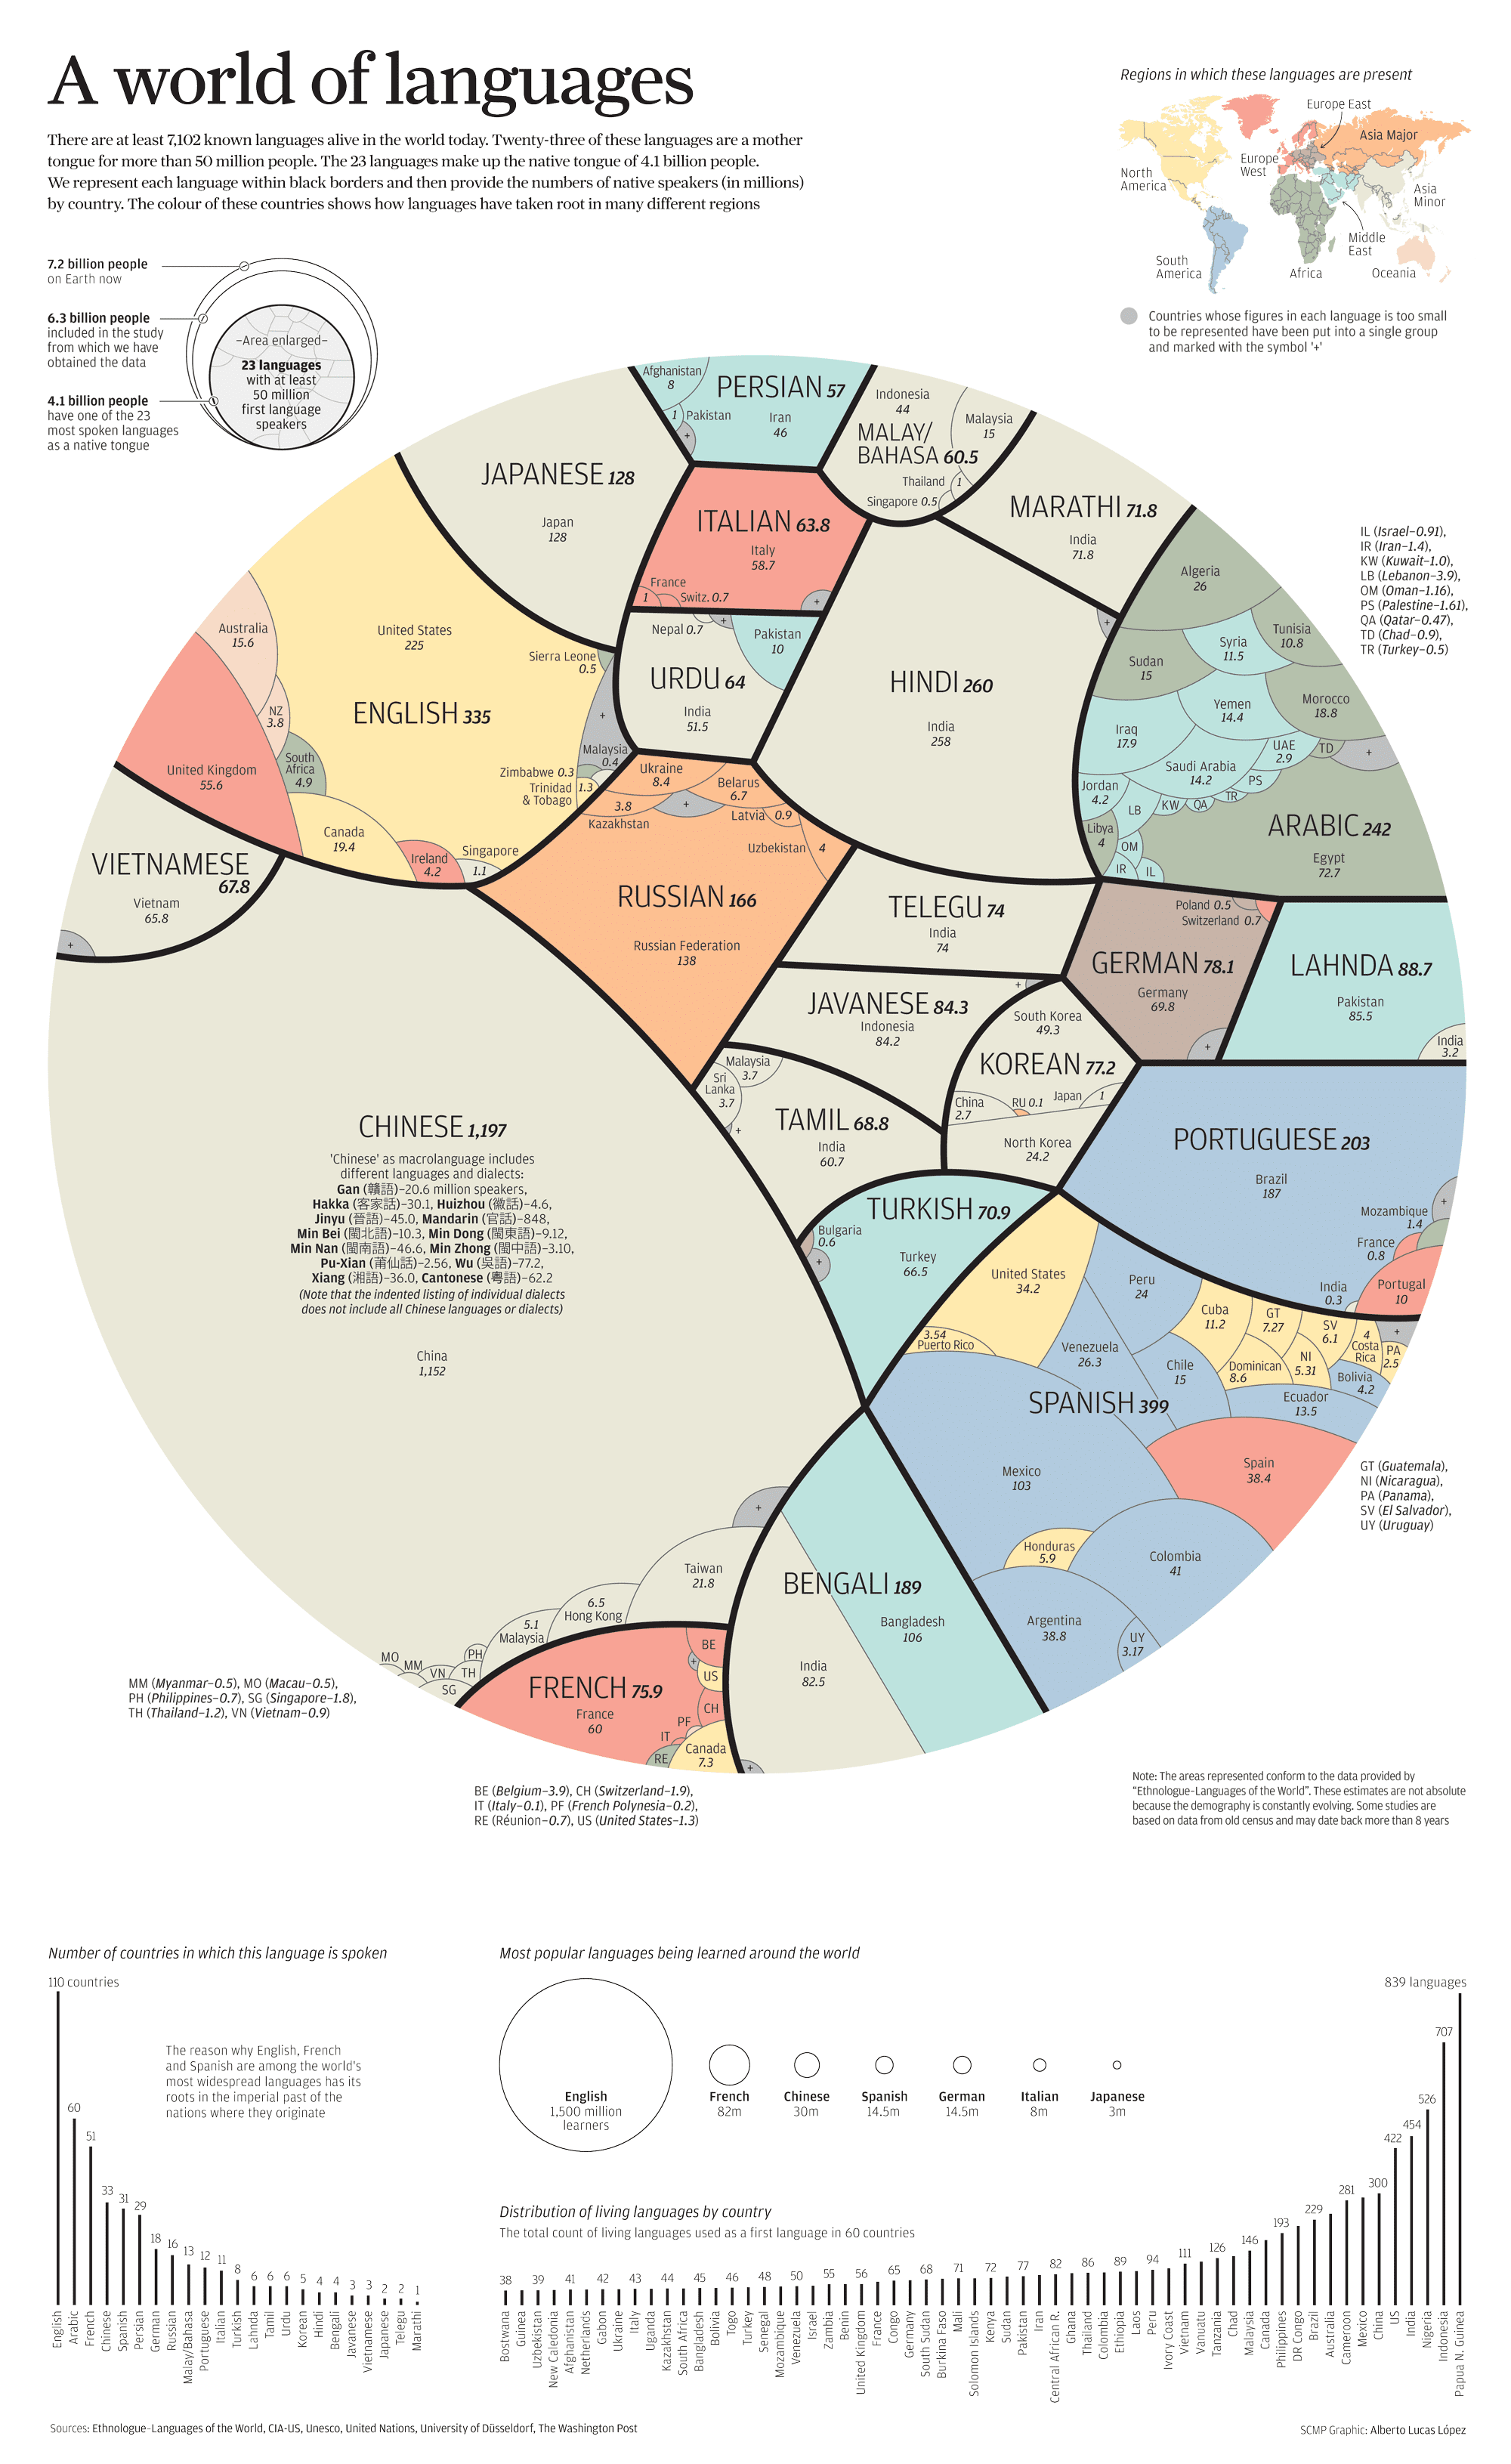 23 Languages Rule the World